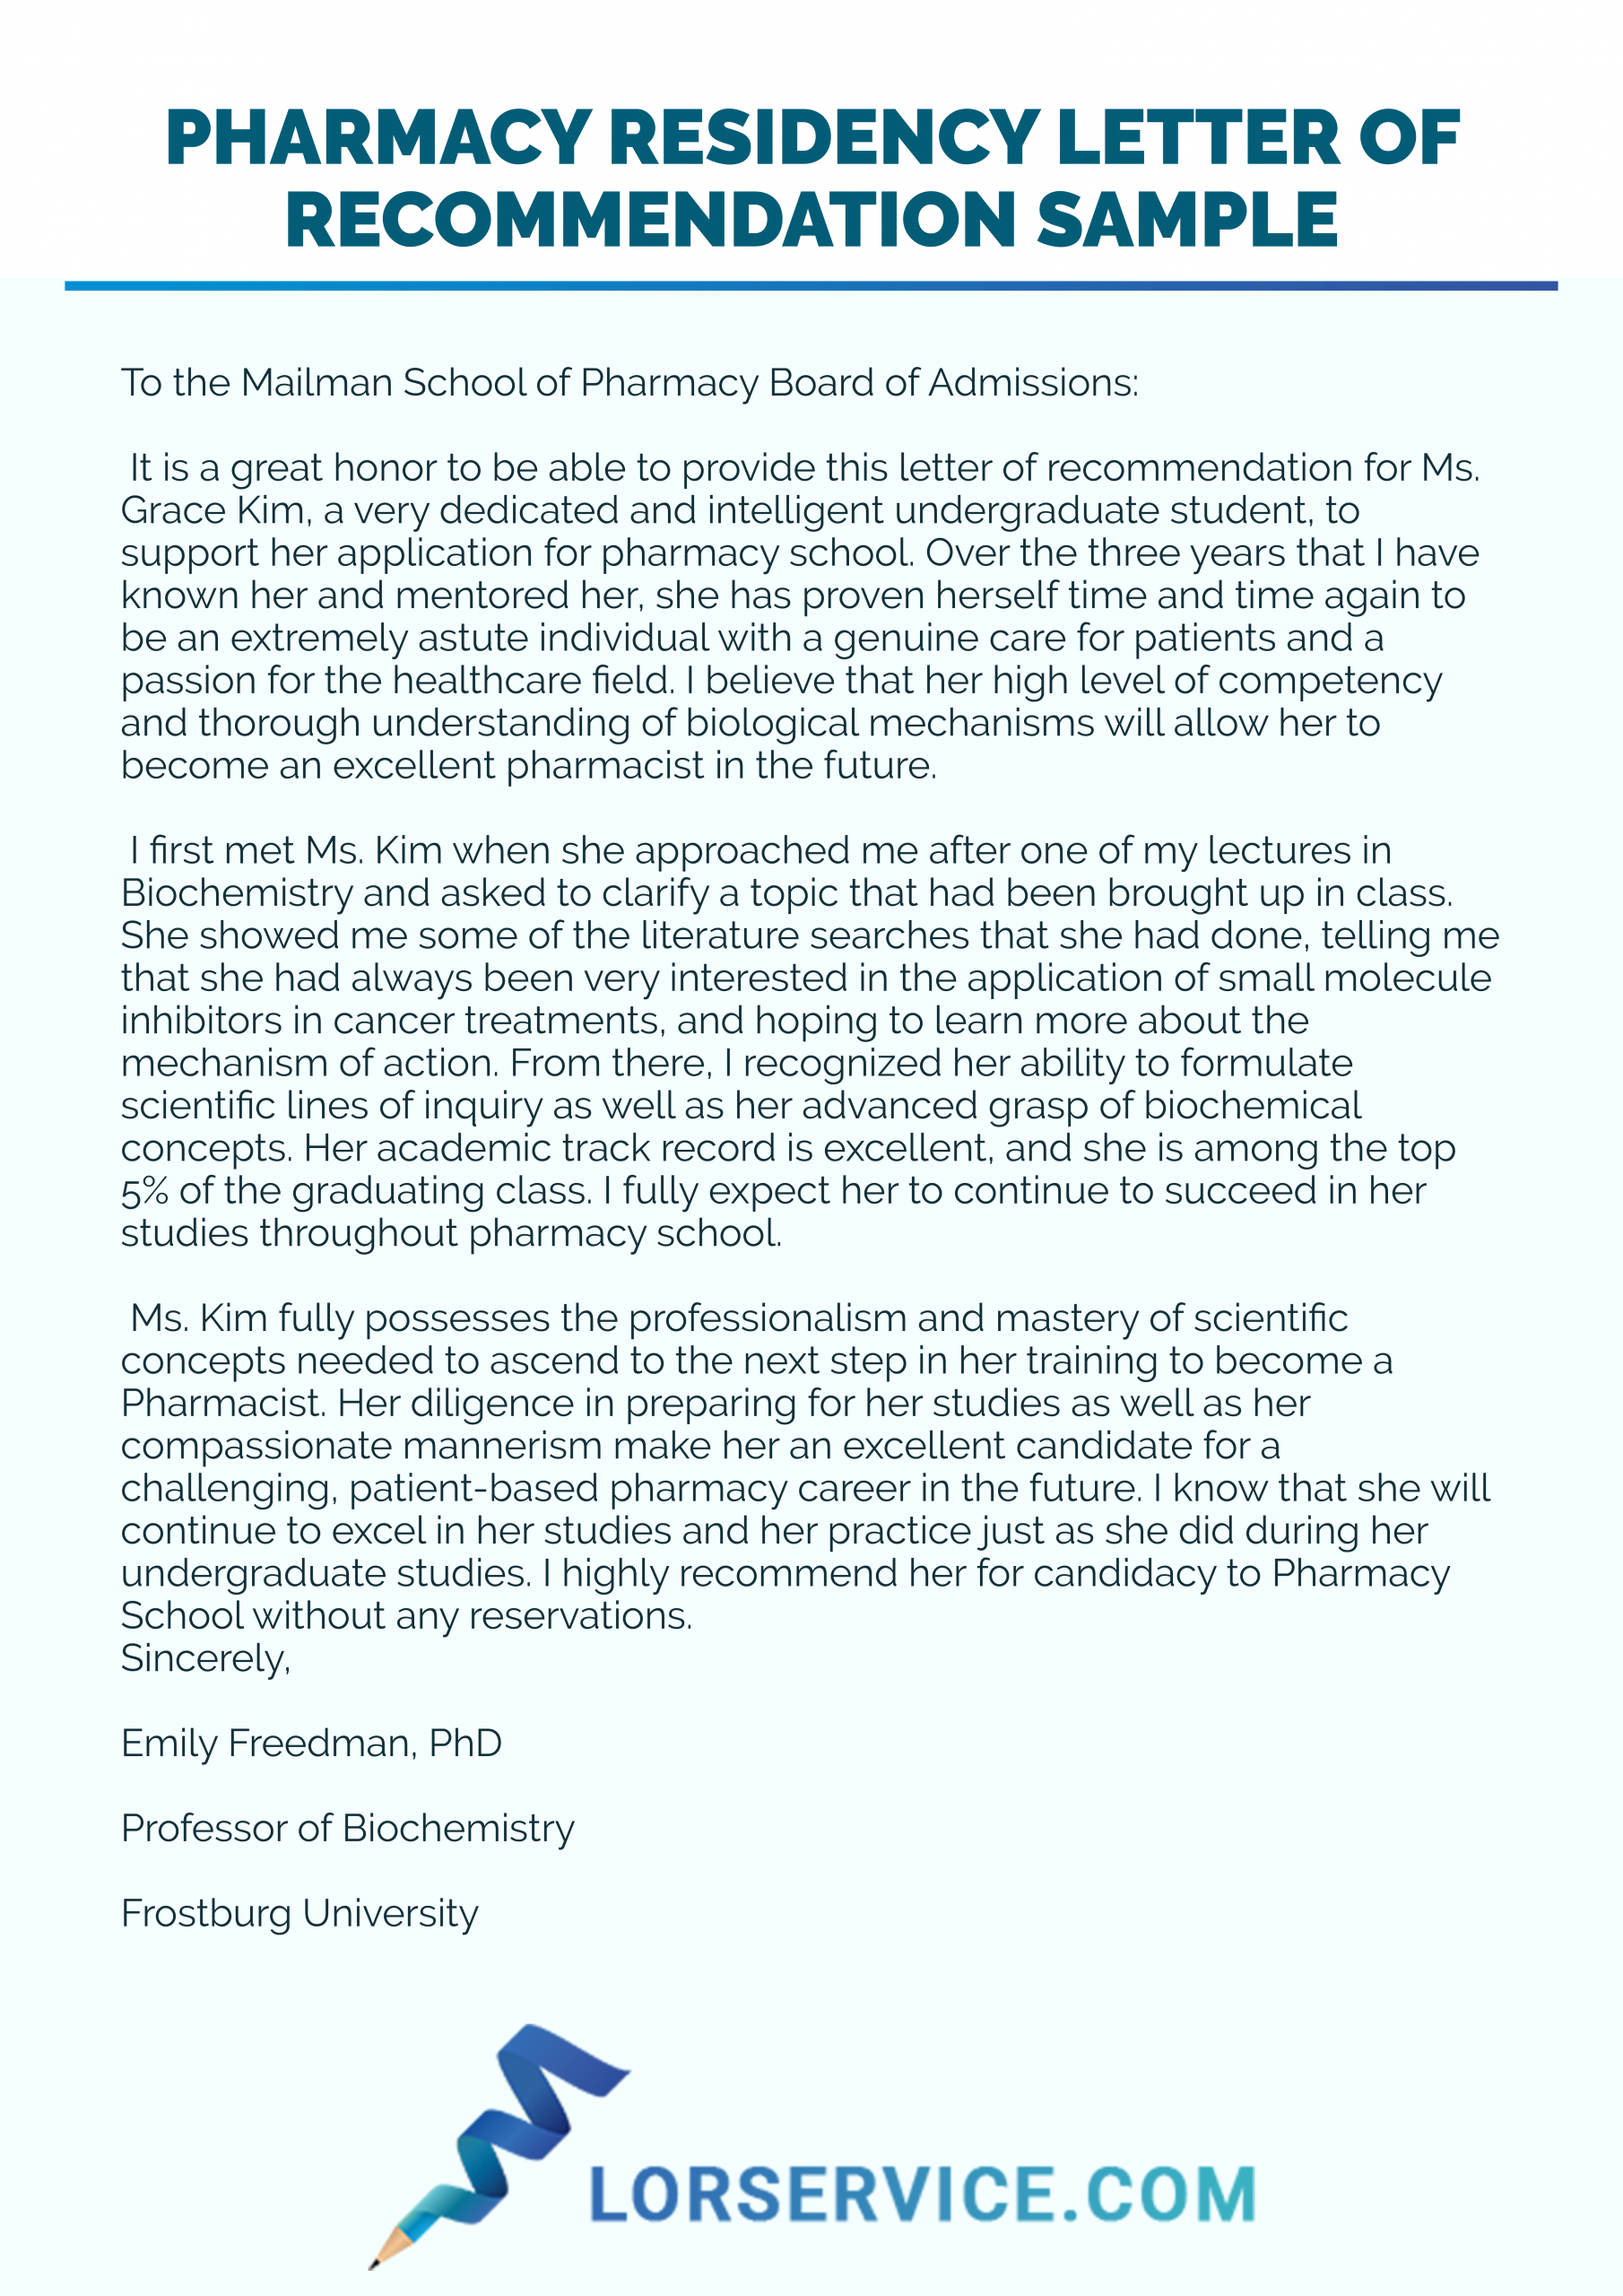 Pharmacy Residency Letter Of Recommendation with regard to dimensions 6300 X 8910